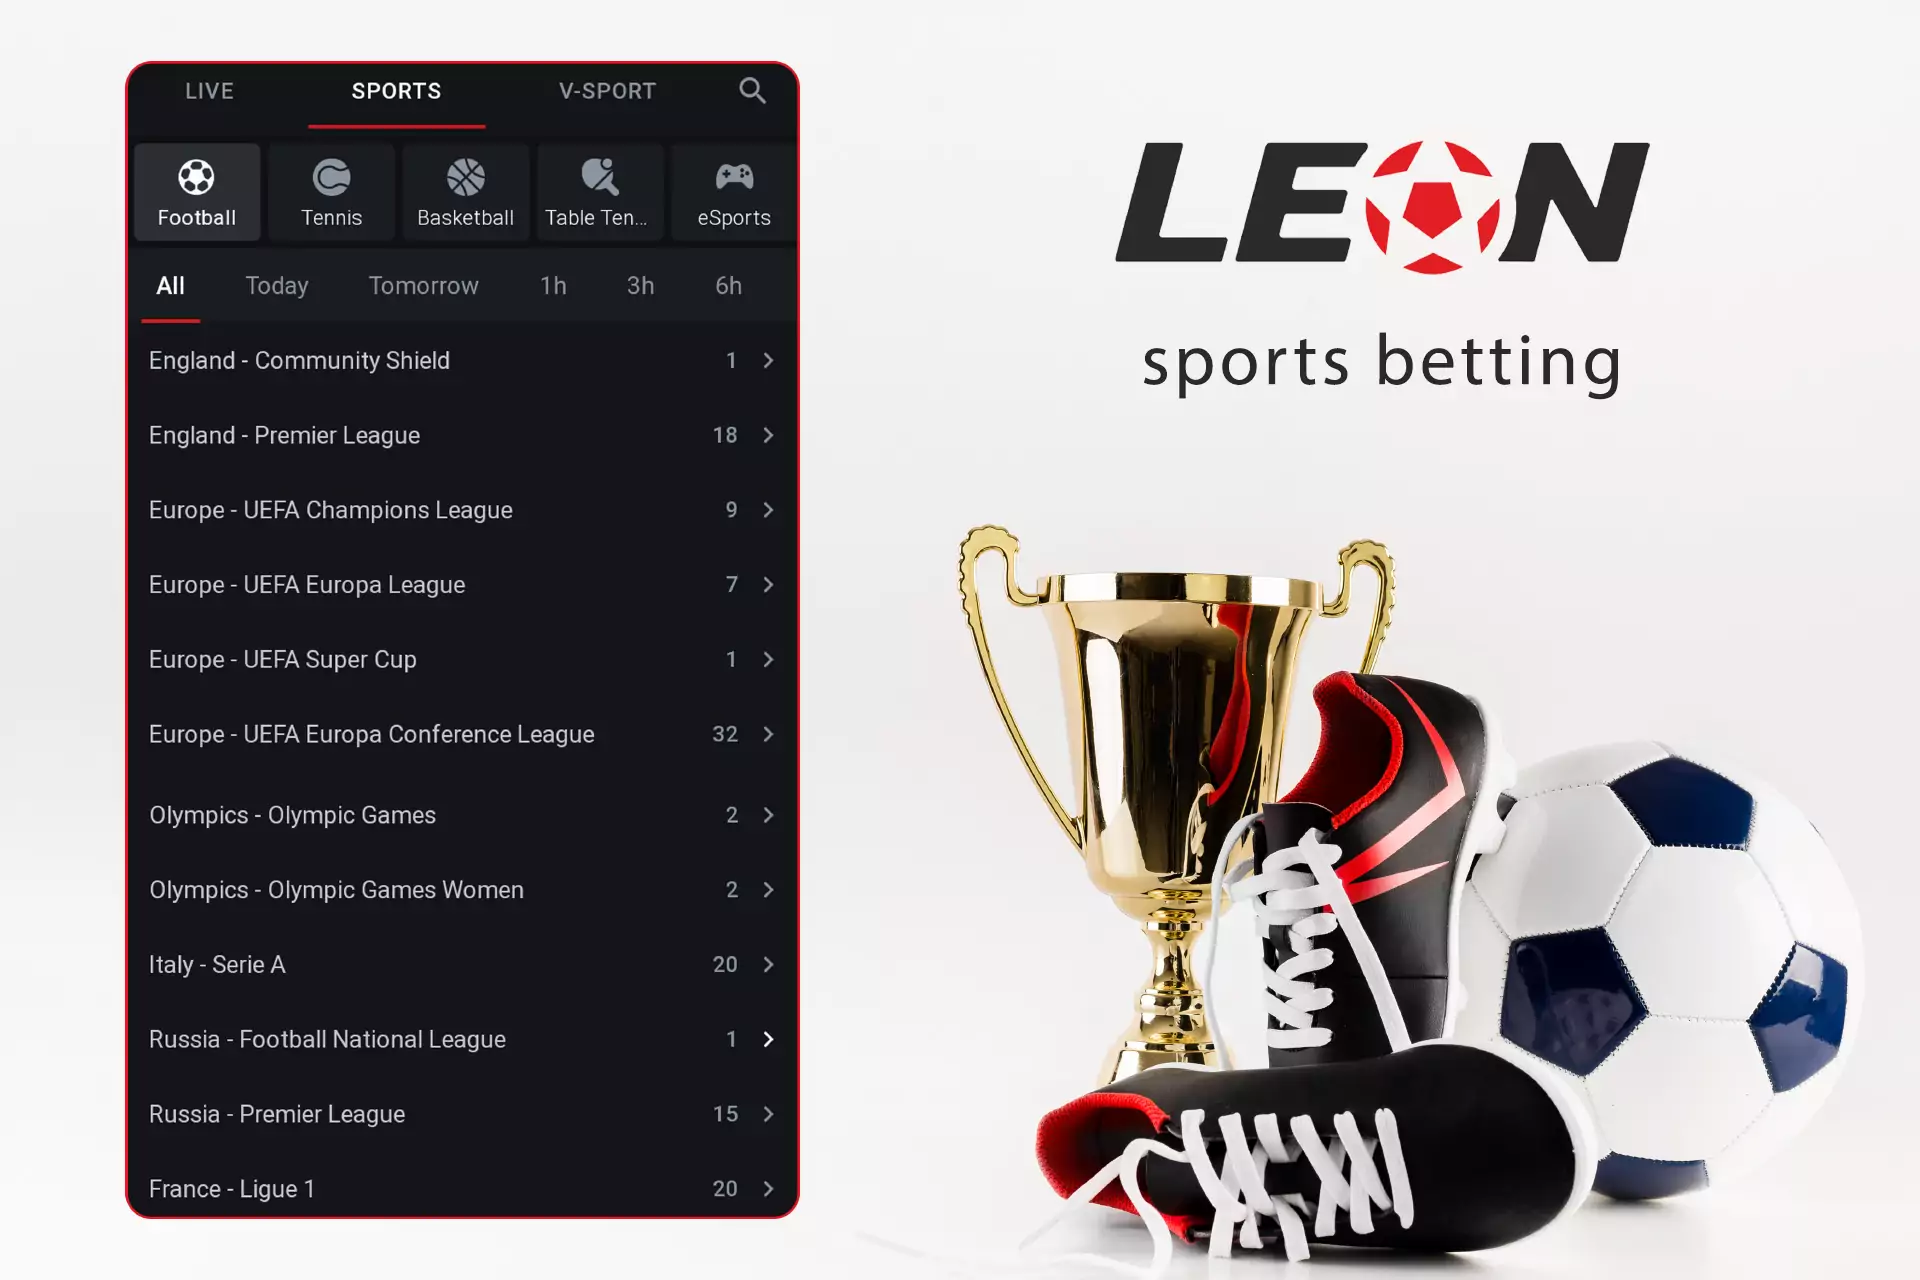 In the sports section, you can place a bet on any available tournament.